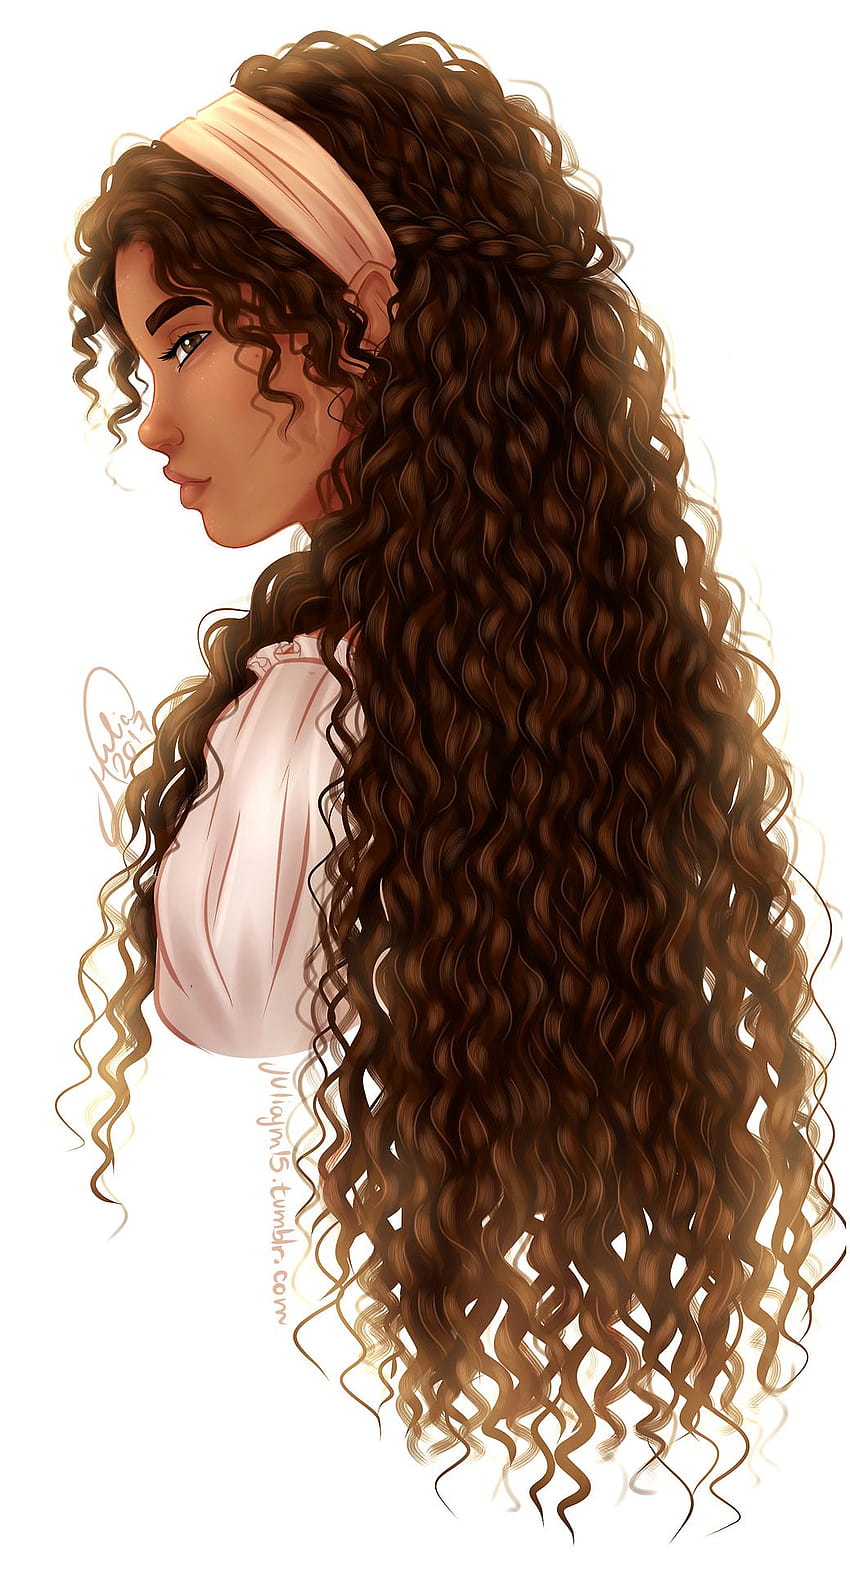 100 Cartoon and Anime Characters with Curly Hair by @animationnation -  Listium